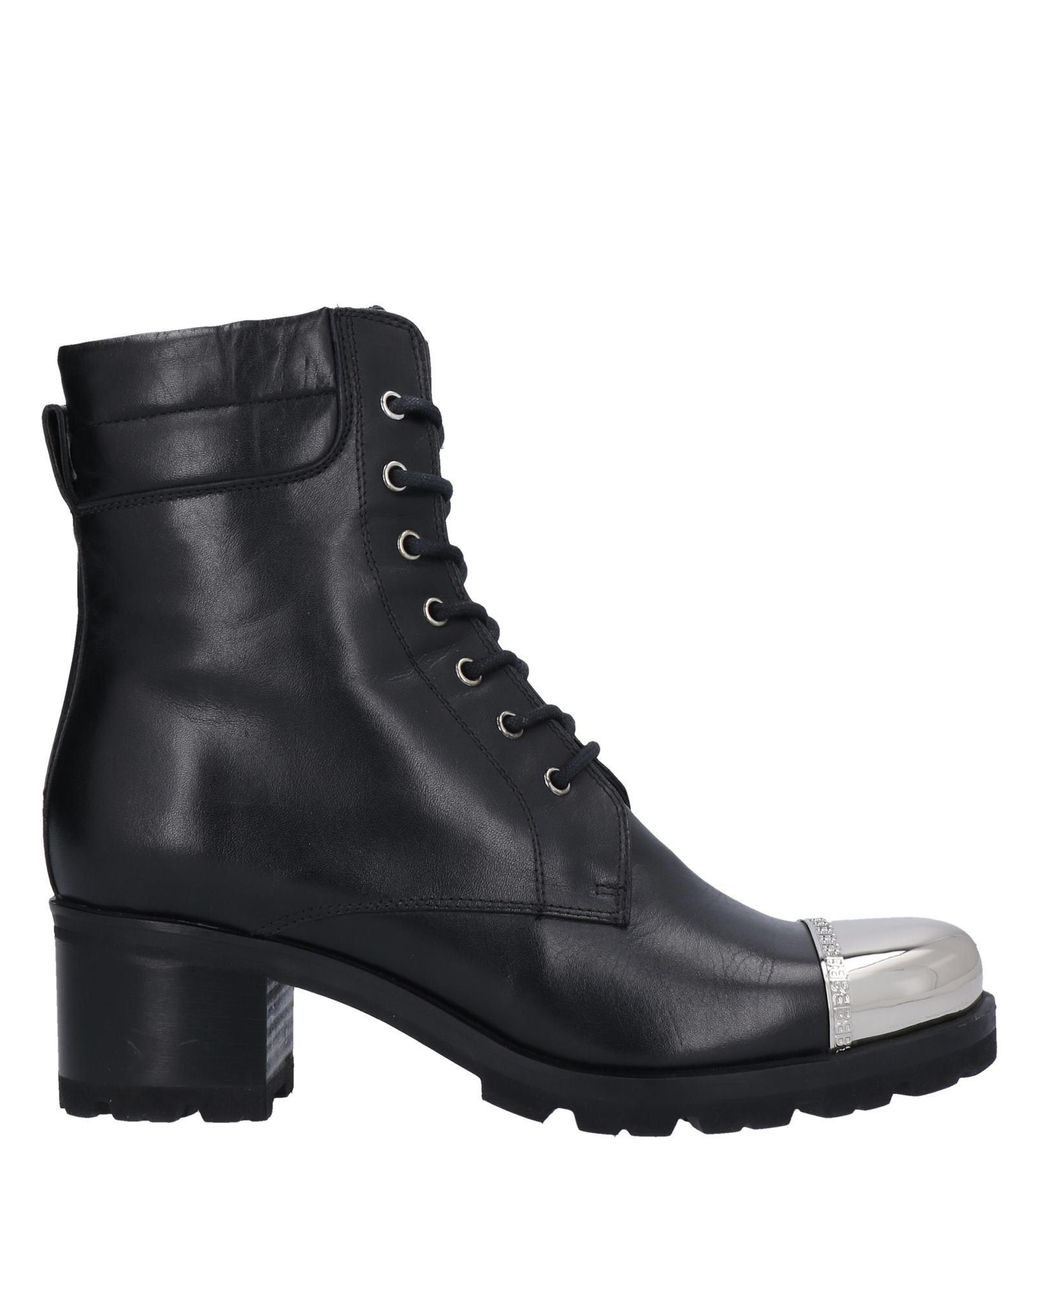 Baldinini Leather Ankle Boots in Black - Lyst